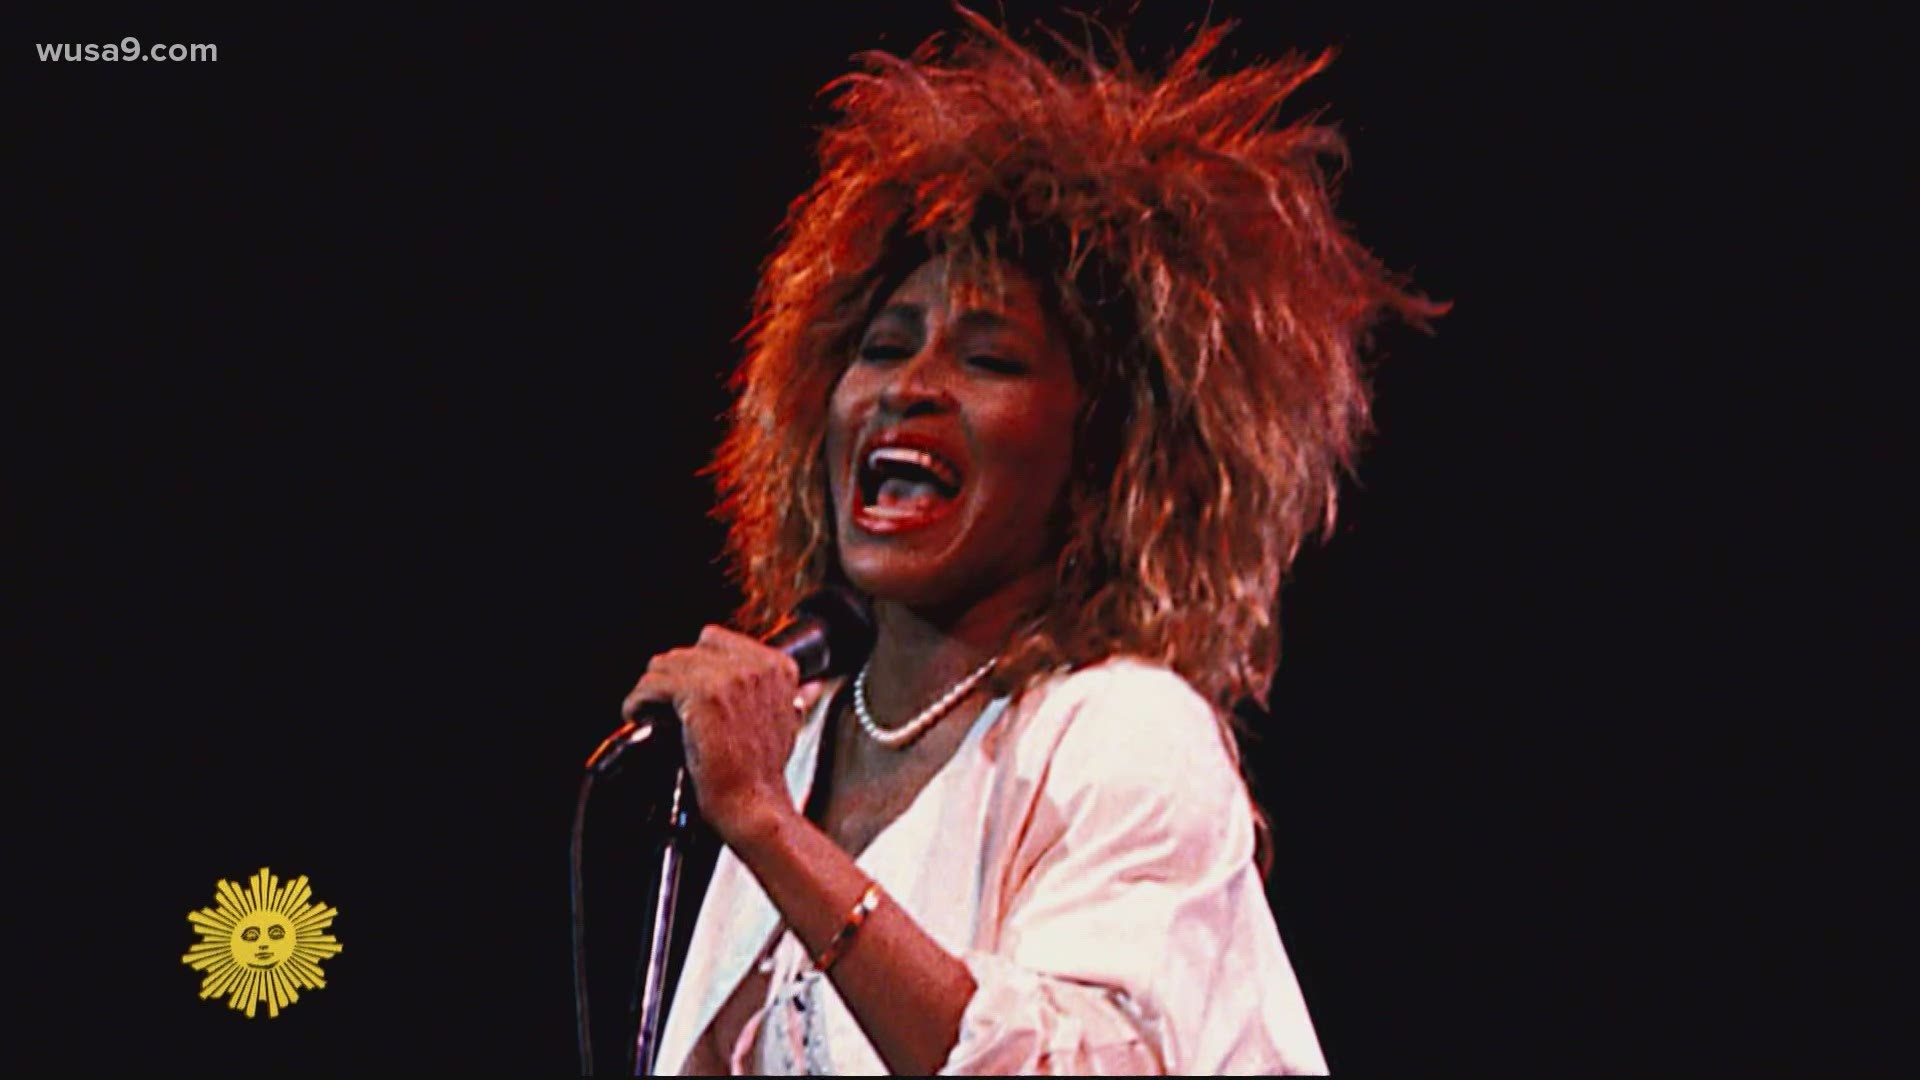 Tina Turner died Tuesday, after a long illness in her home in Küsnacht near Zurich, Switzerland, according to her manager. She became a Swiss citizen a decade ago.